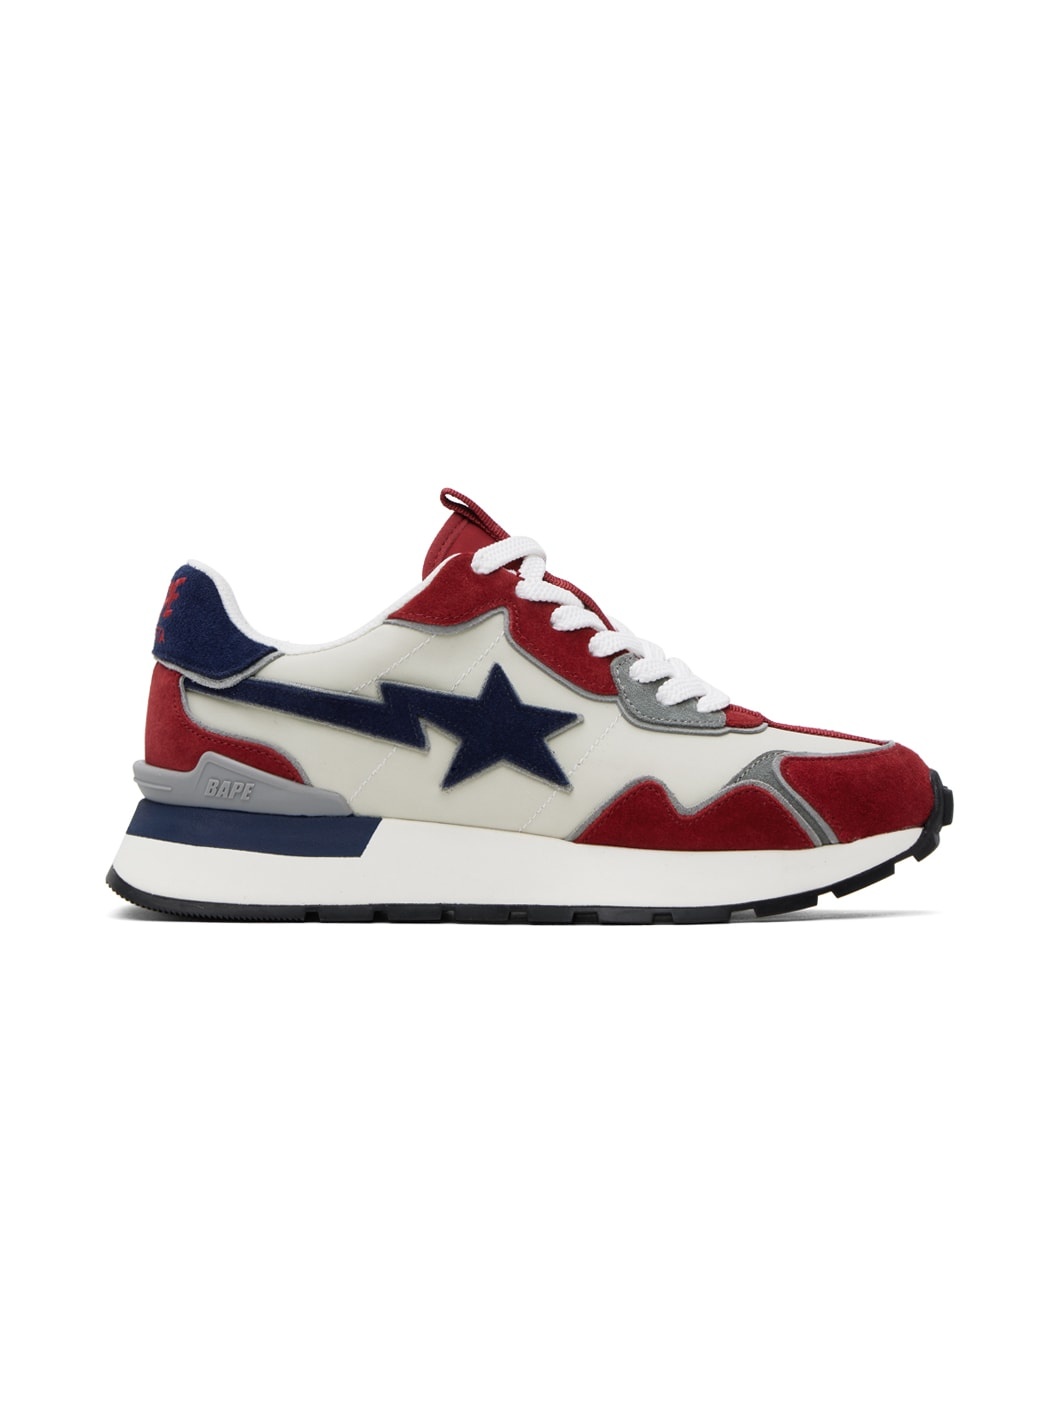 Red & Navy Road STA Express Sneakers - 1